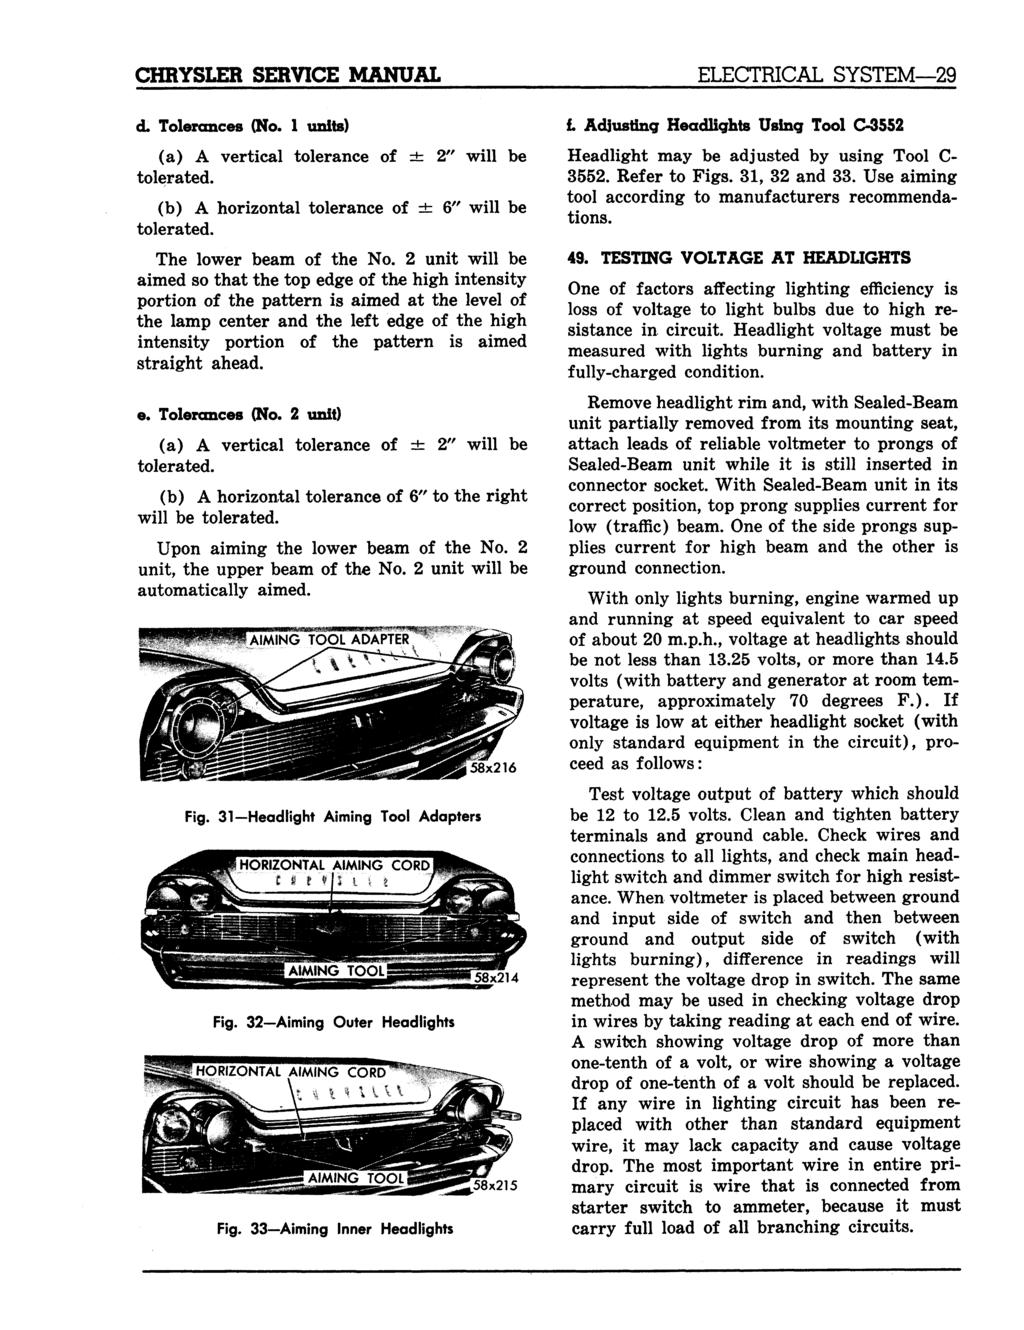 CHRYSLER SERVICE MANUAL d. Tolerances (No. 1 units) (a) A vertical tolerance of it 2" will be tolerated. (b) A horizontal tolerance of =fc 6" will be tolerated. The lower beam of the No.